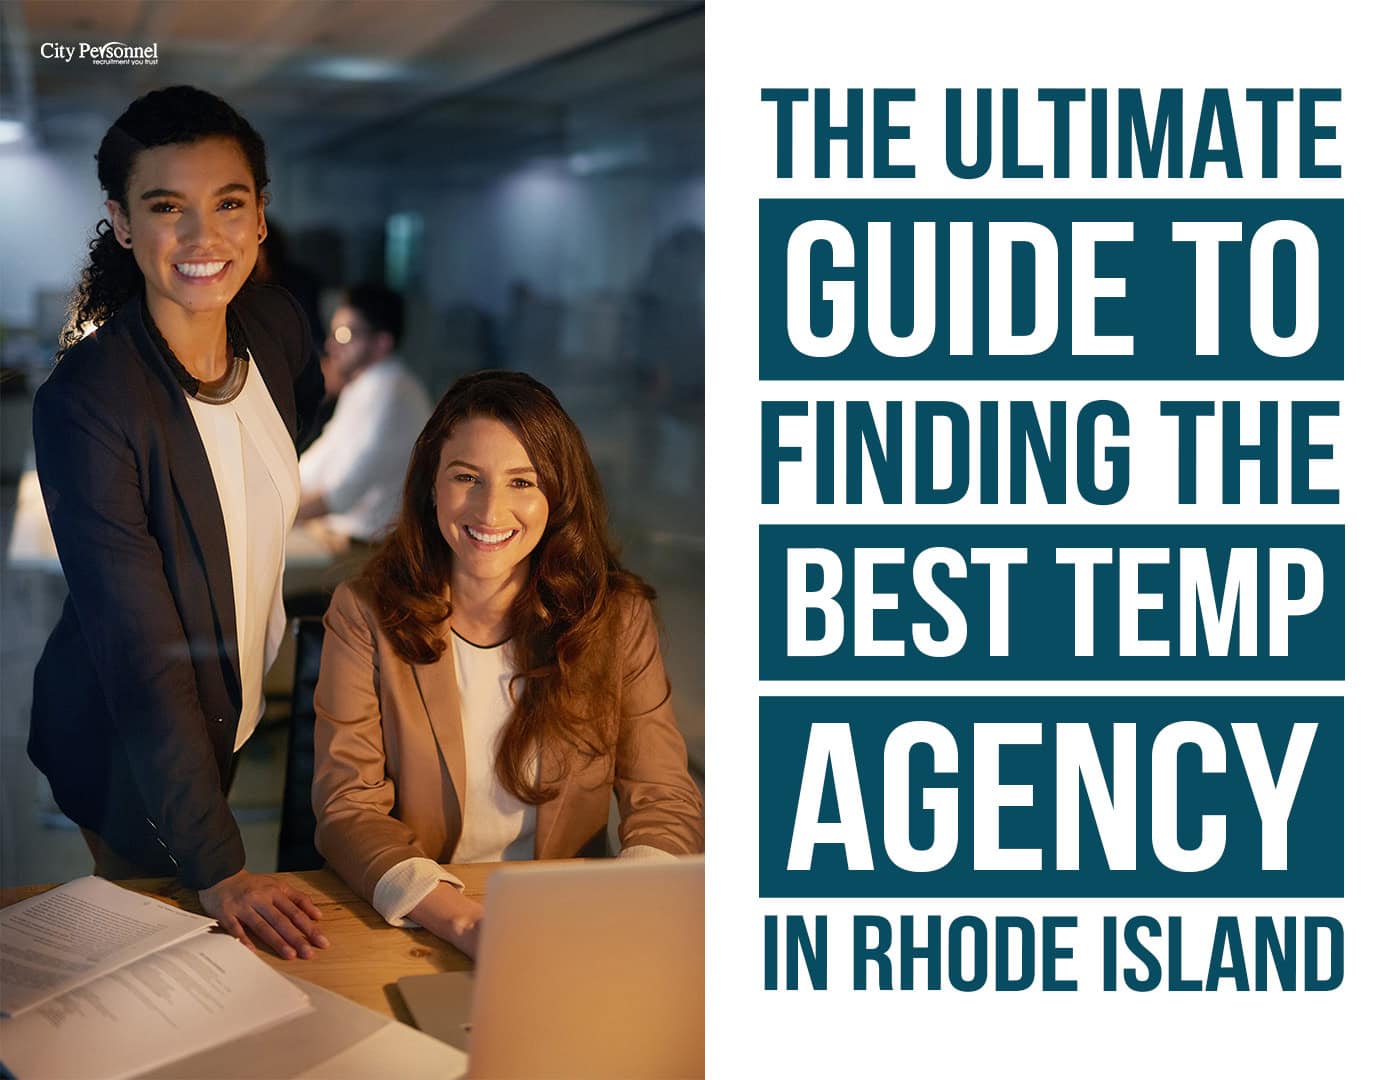 The Ultimate Guide to Finding the Best Temp Agency in RI